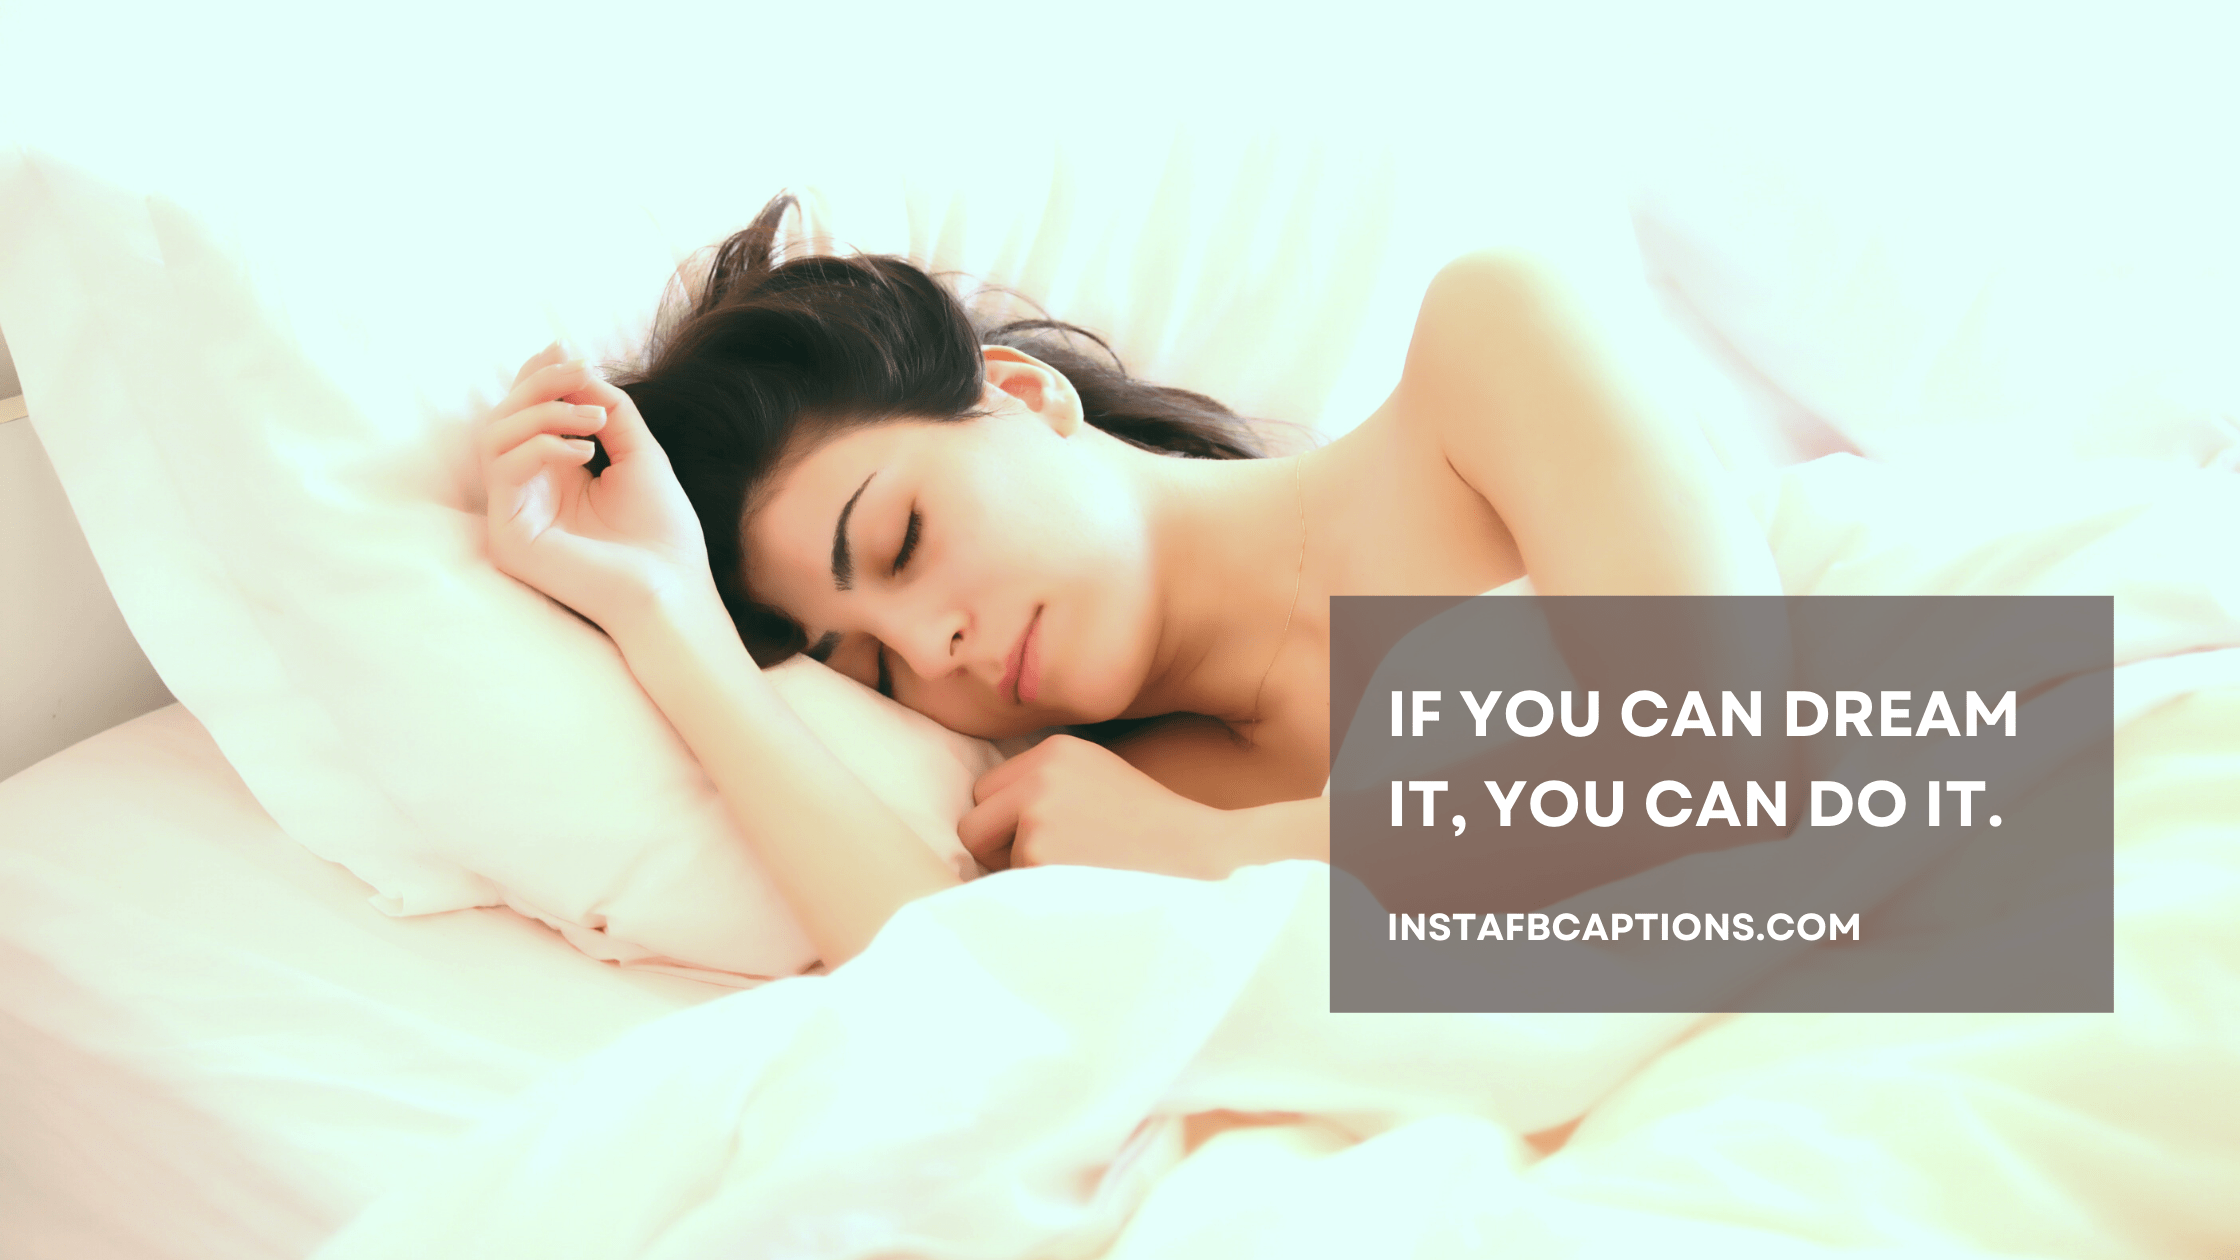 If you can dream it, you can do it.  - Dream Captions for a Girl  - 85 Dream Captions, Quotes &#038; Hashtags For Instagram